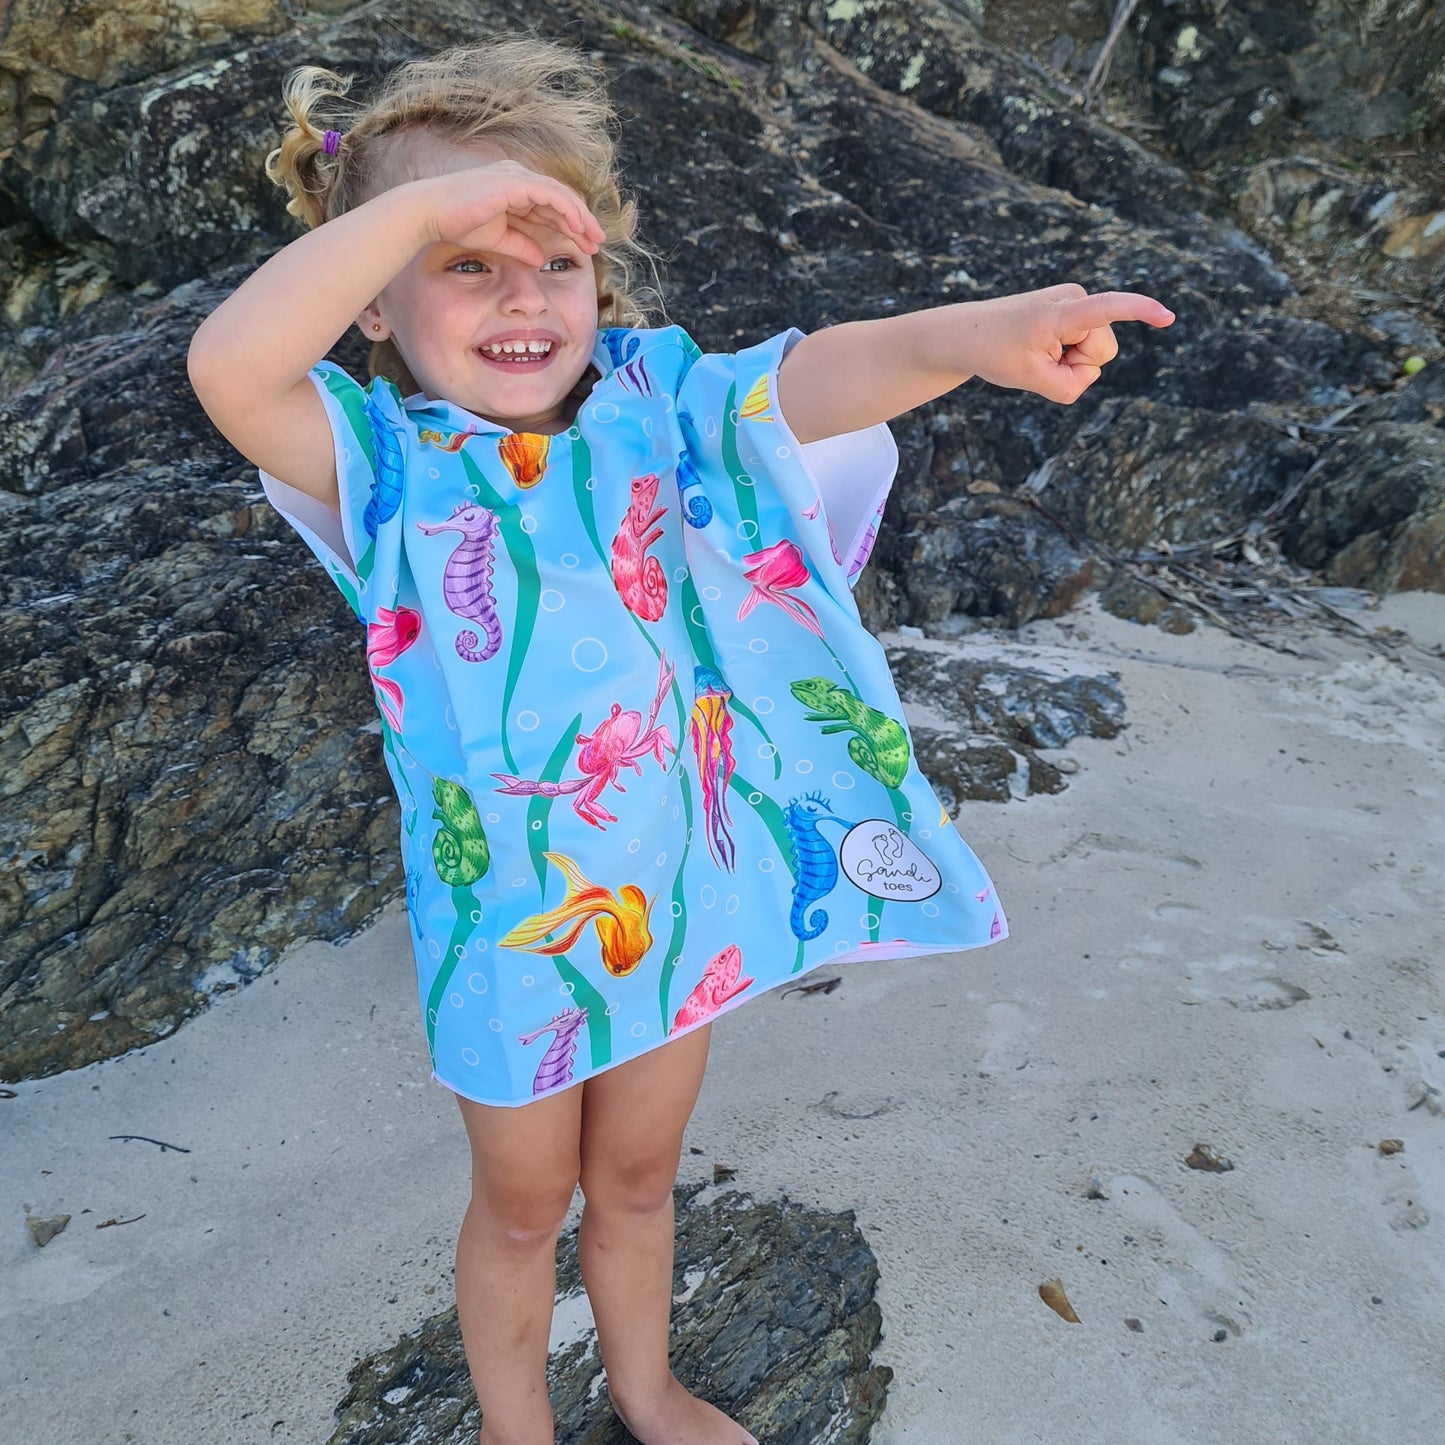 Currumbin Beach Queensland is the setting for this photo of a three year old girl wearing a sand free beach towel pointing out to sea